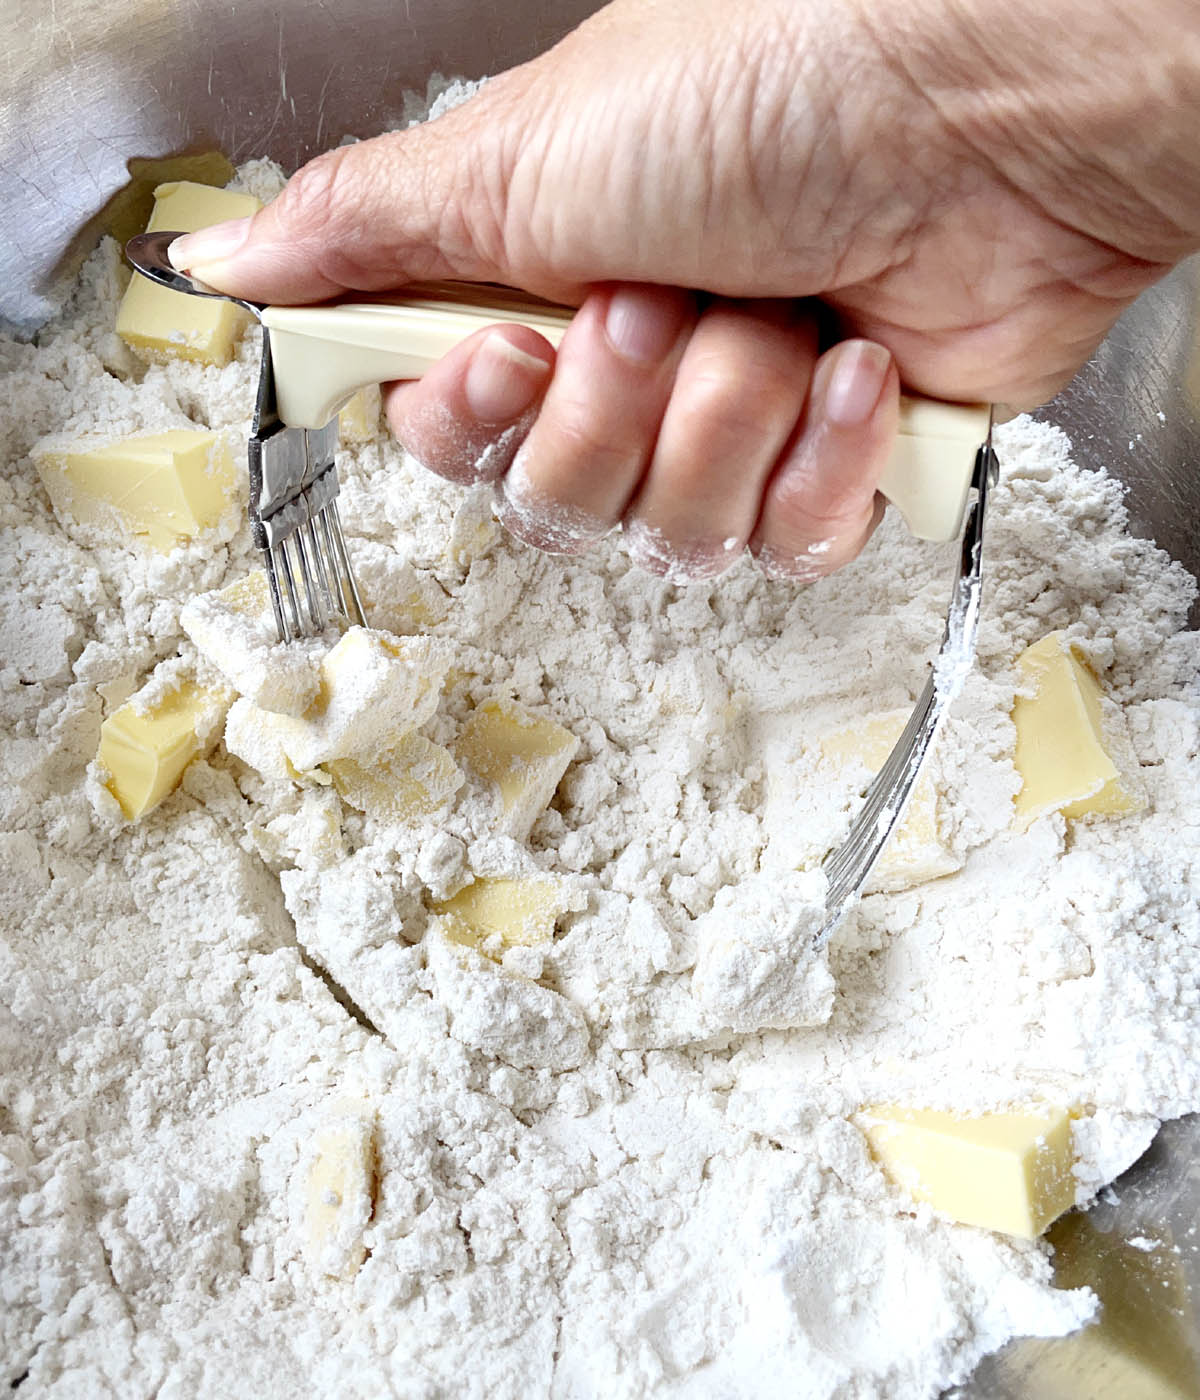 A hand holding a pastry cutter, cutting into butter in a flour mixture in a bowl.